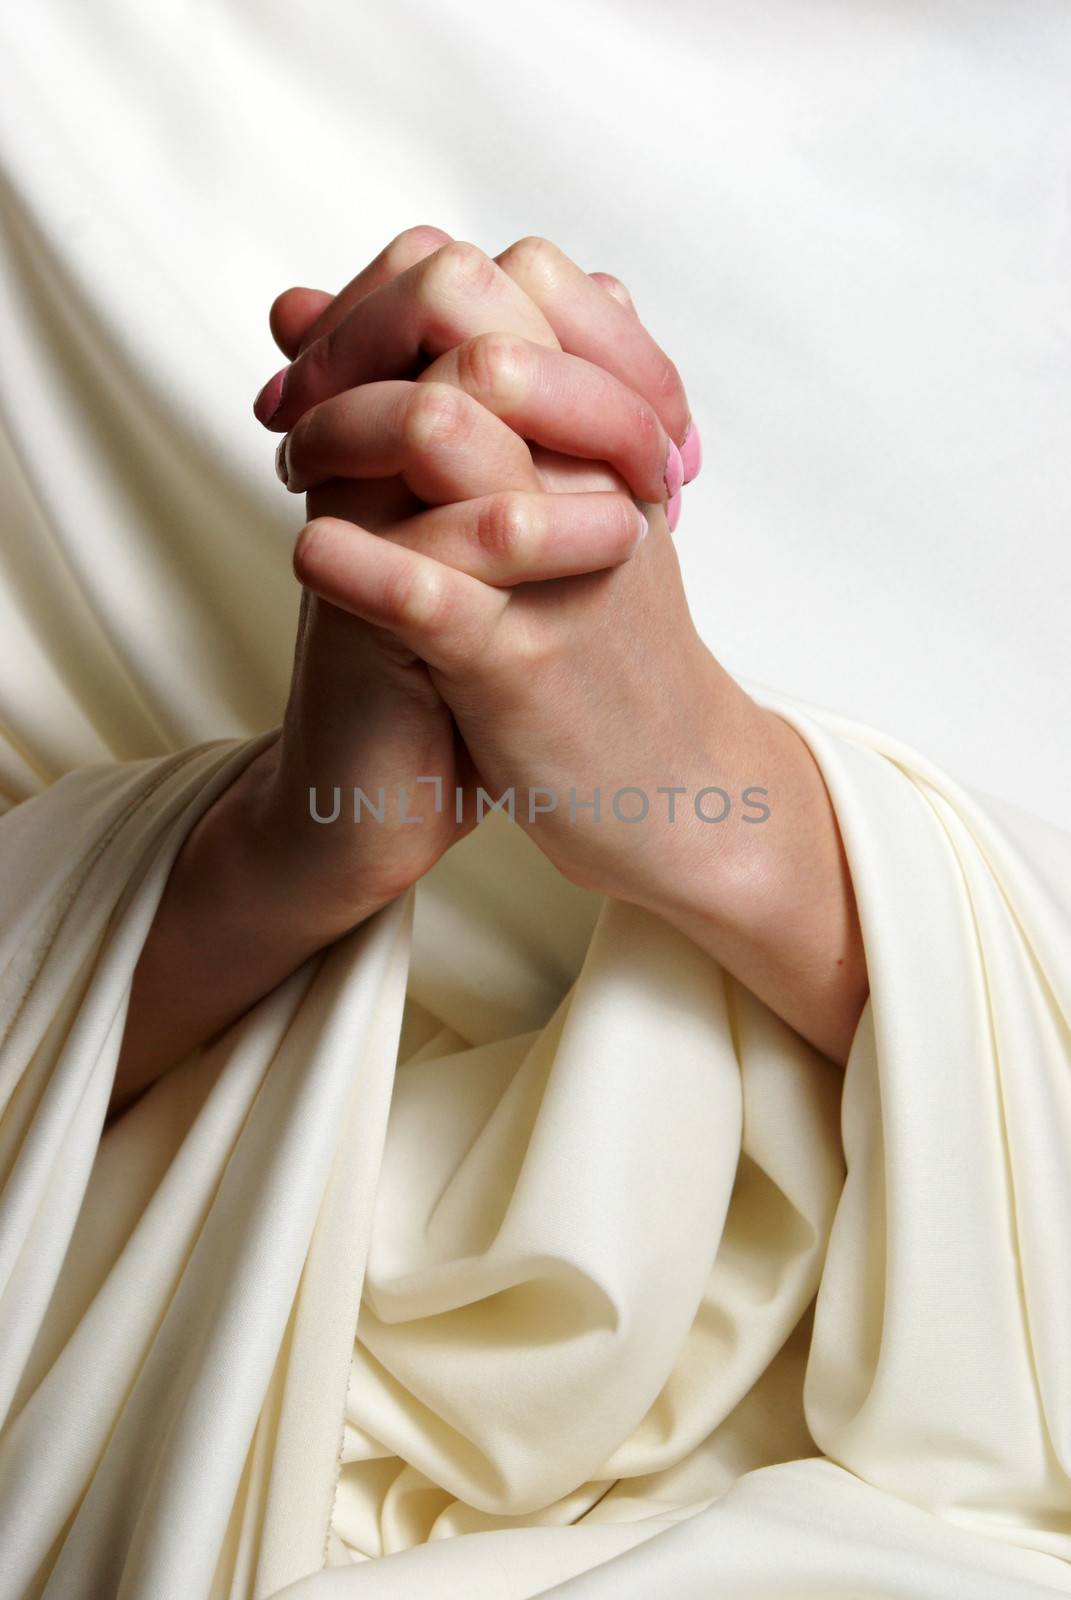 A young woman faithfully brings her hands together in essence of prayer.